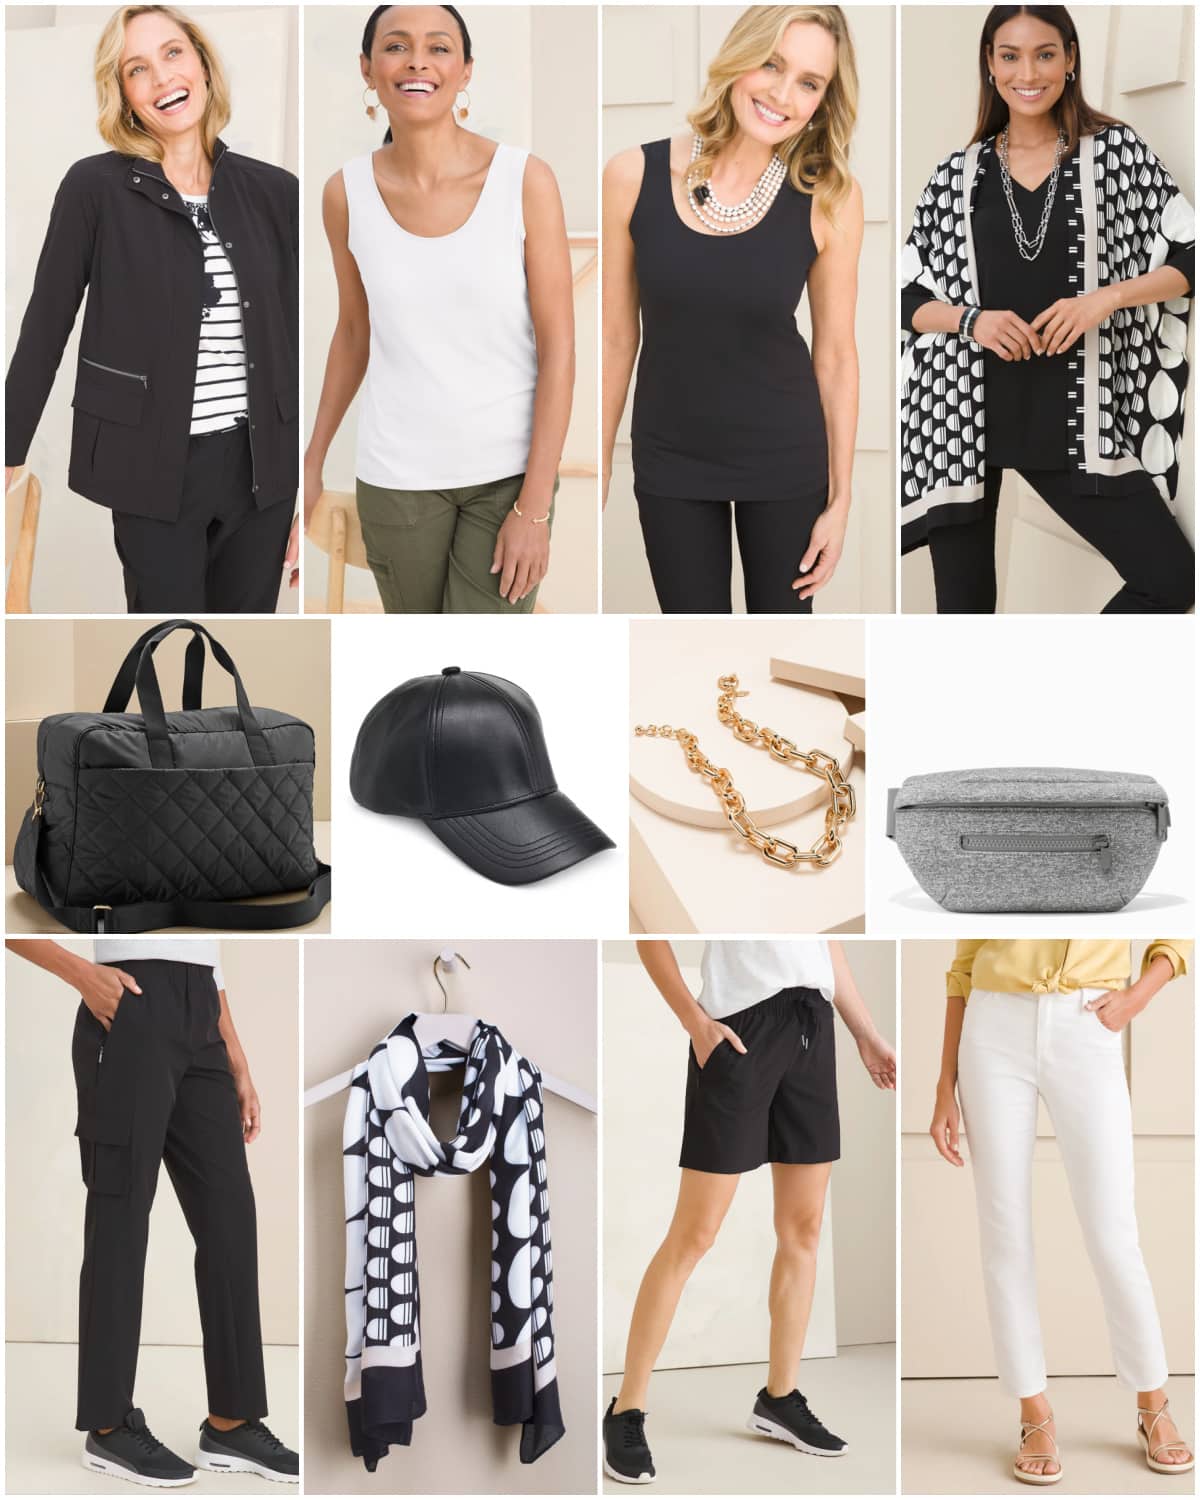 Maternity Capsule Wardrobe: Spring/Summer 2019 (18 Pieces) - Classy Yet  Trendy